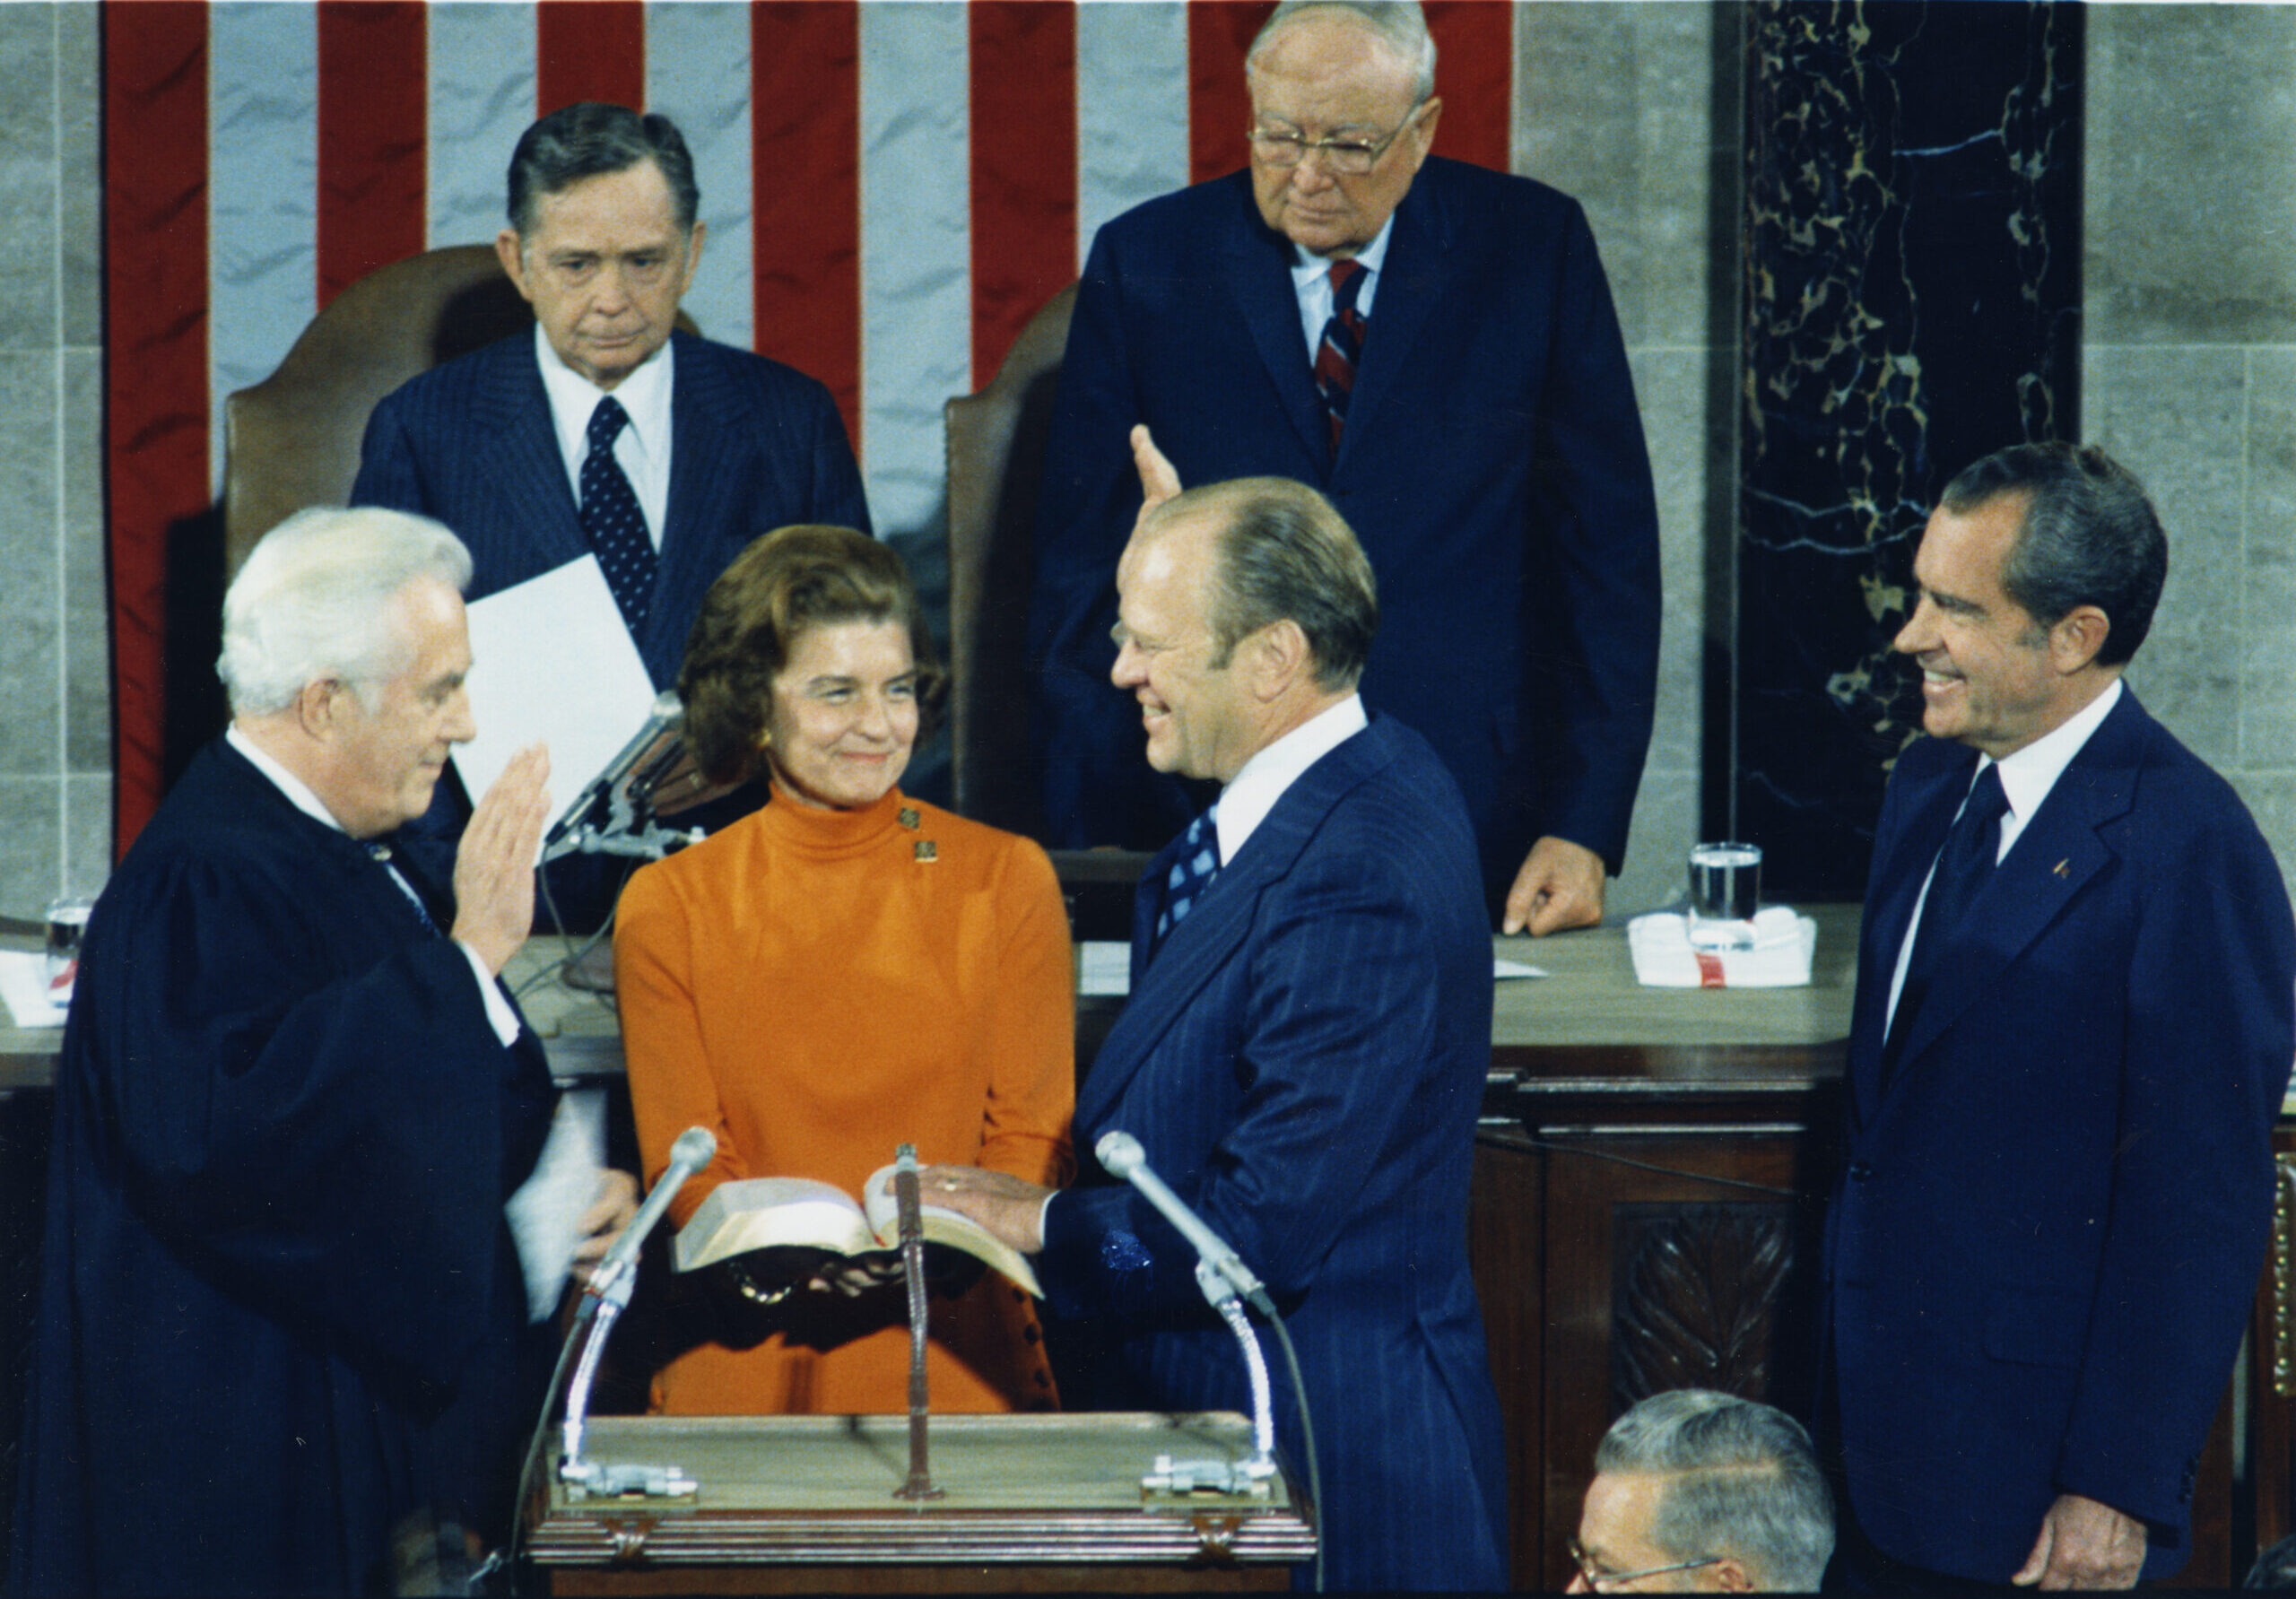 President Ford being sworn in as Vice President